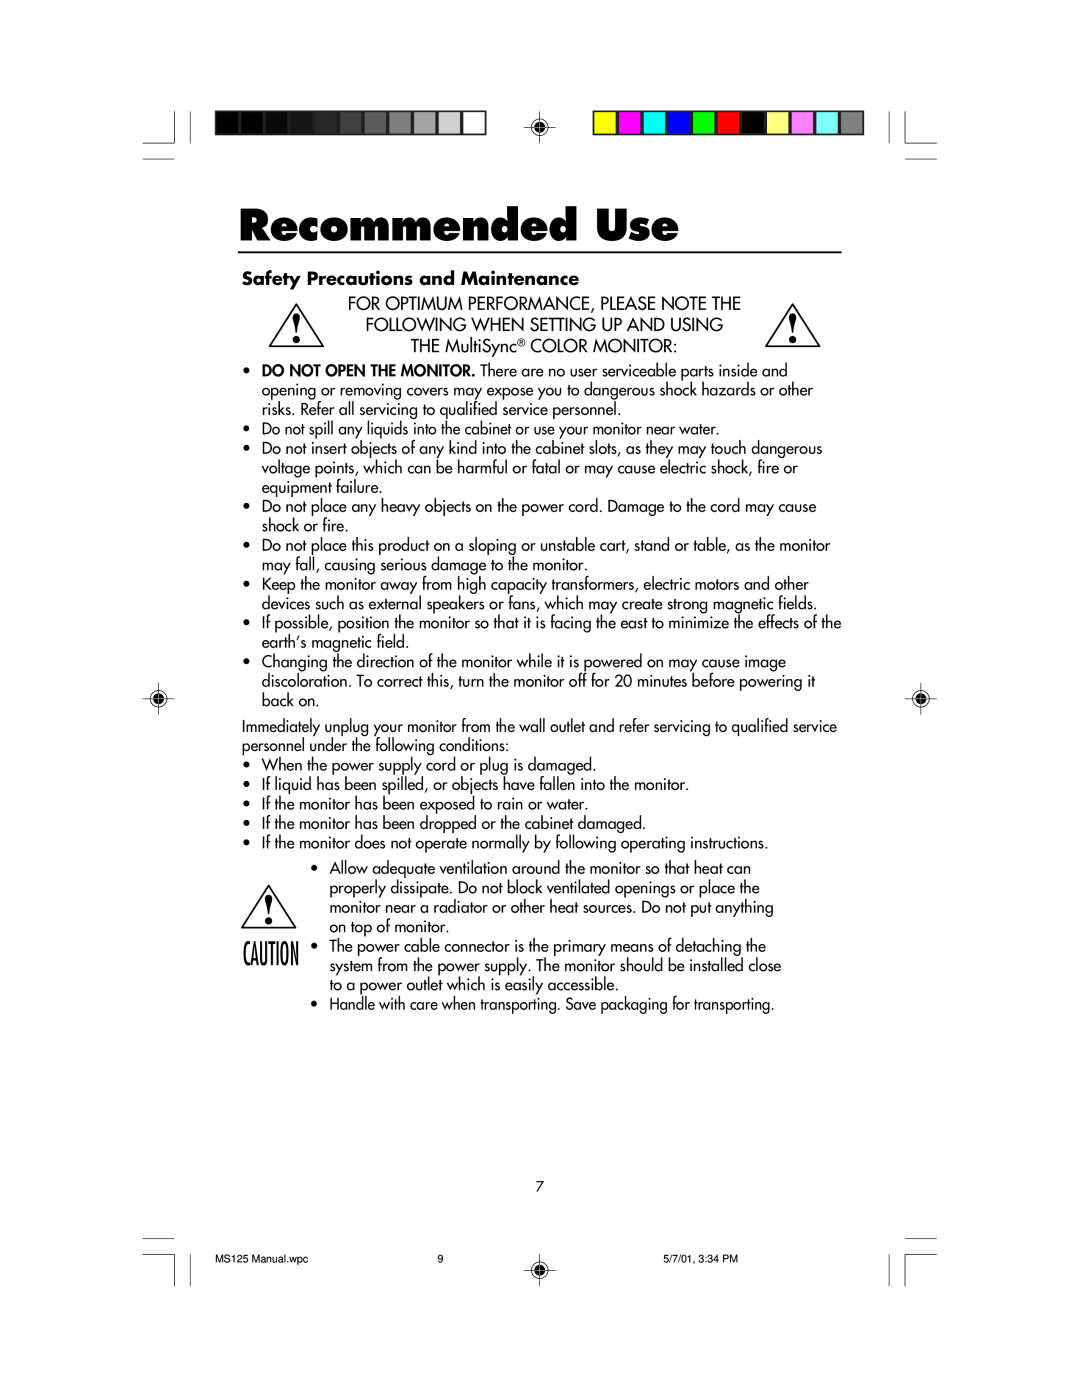 NEC MS125 manual Recommended Use, Safety Precautions and Maintenance 